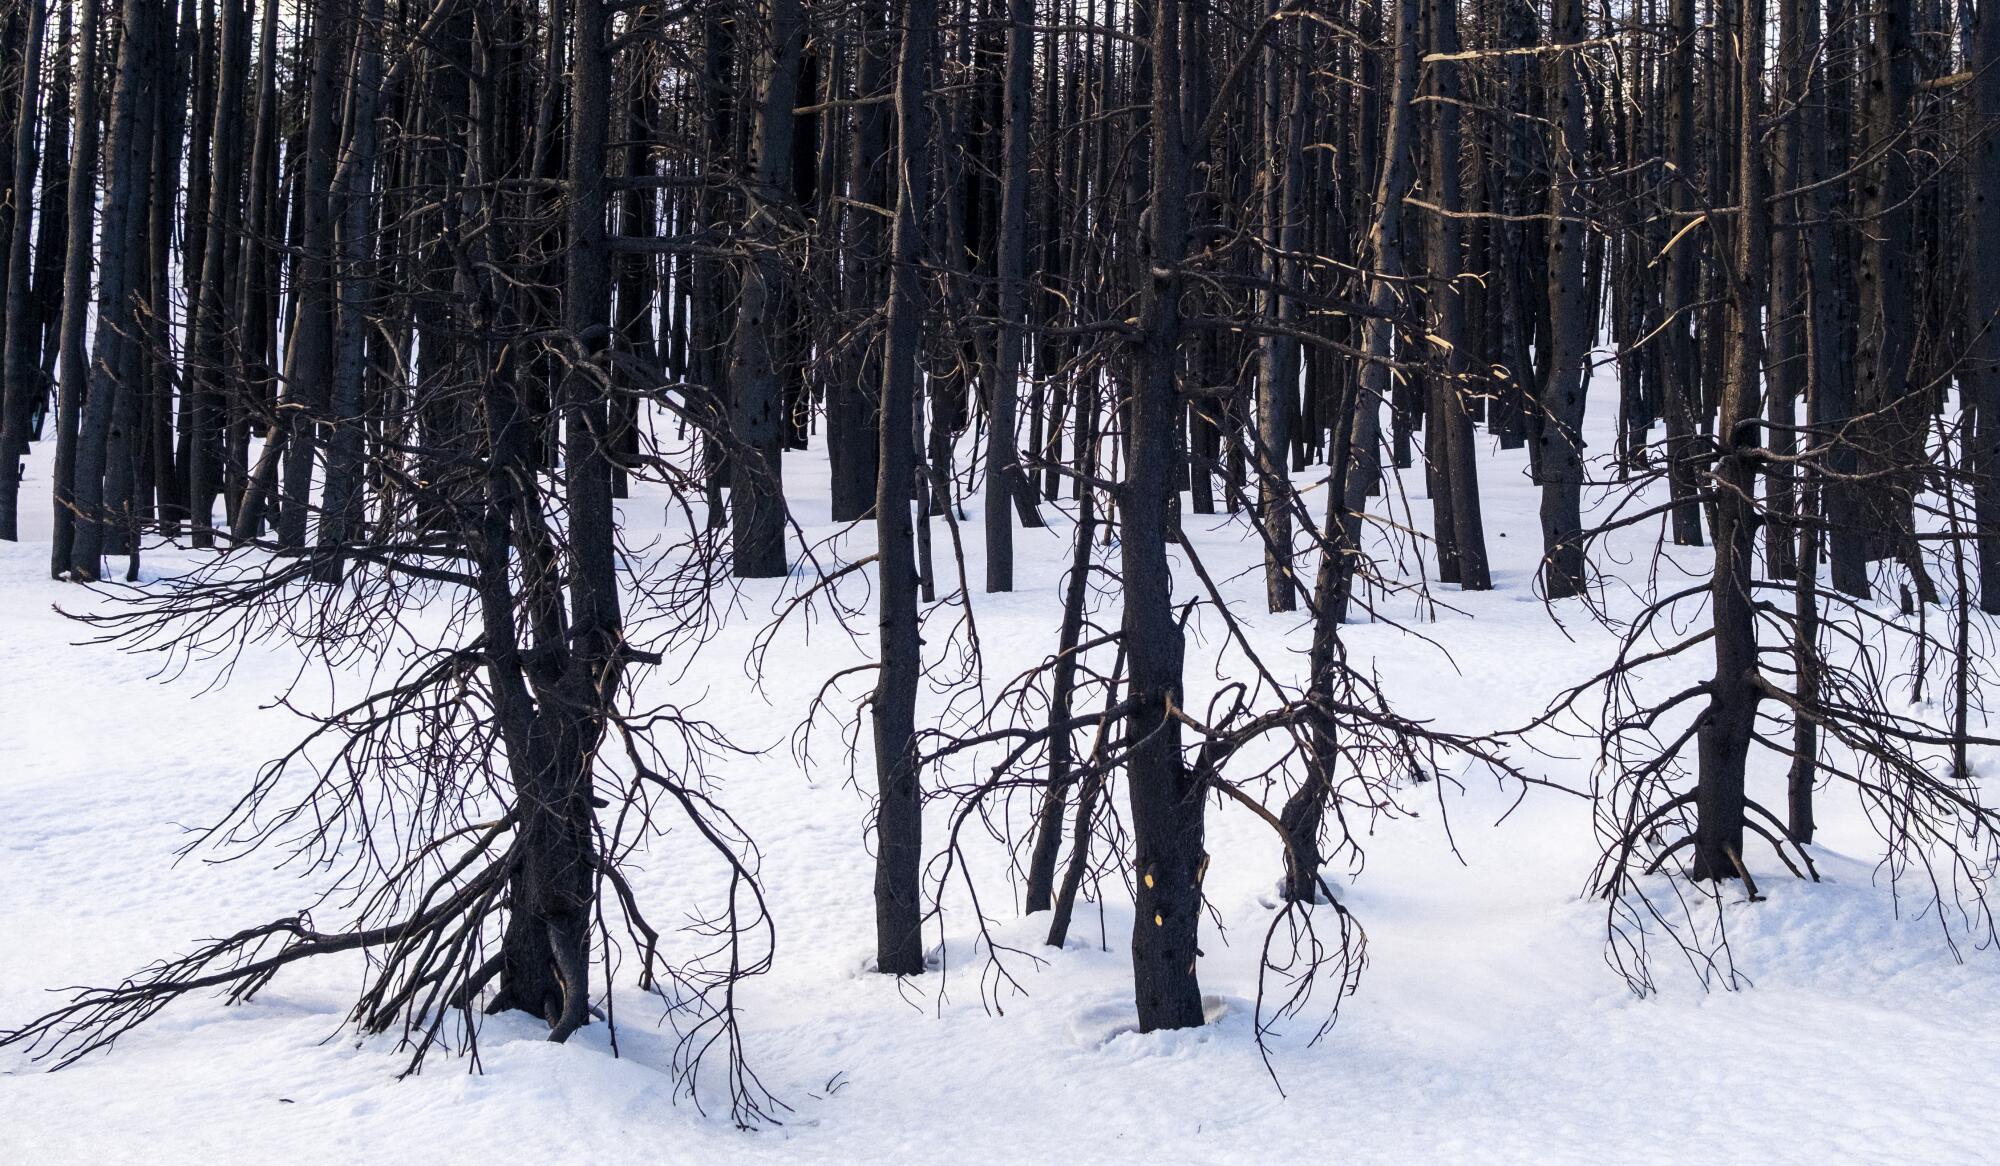 The crowded trunks of small trees blackened by fire rise from snowy ground.